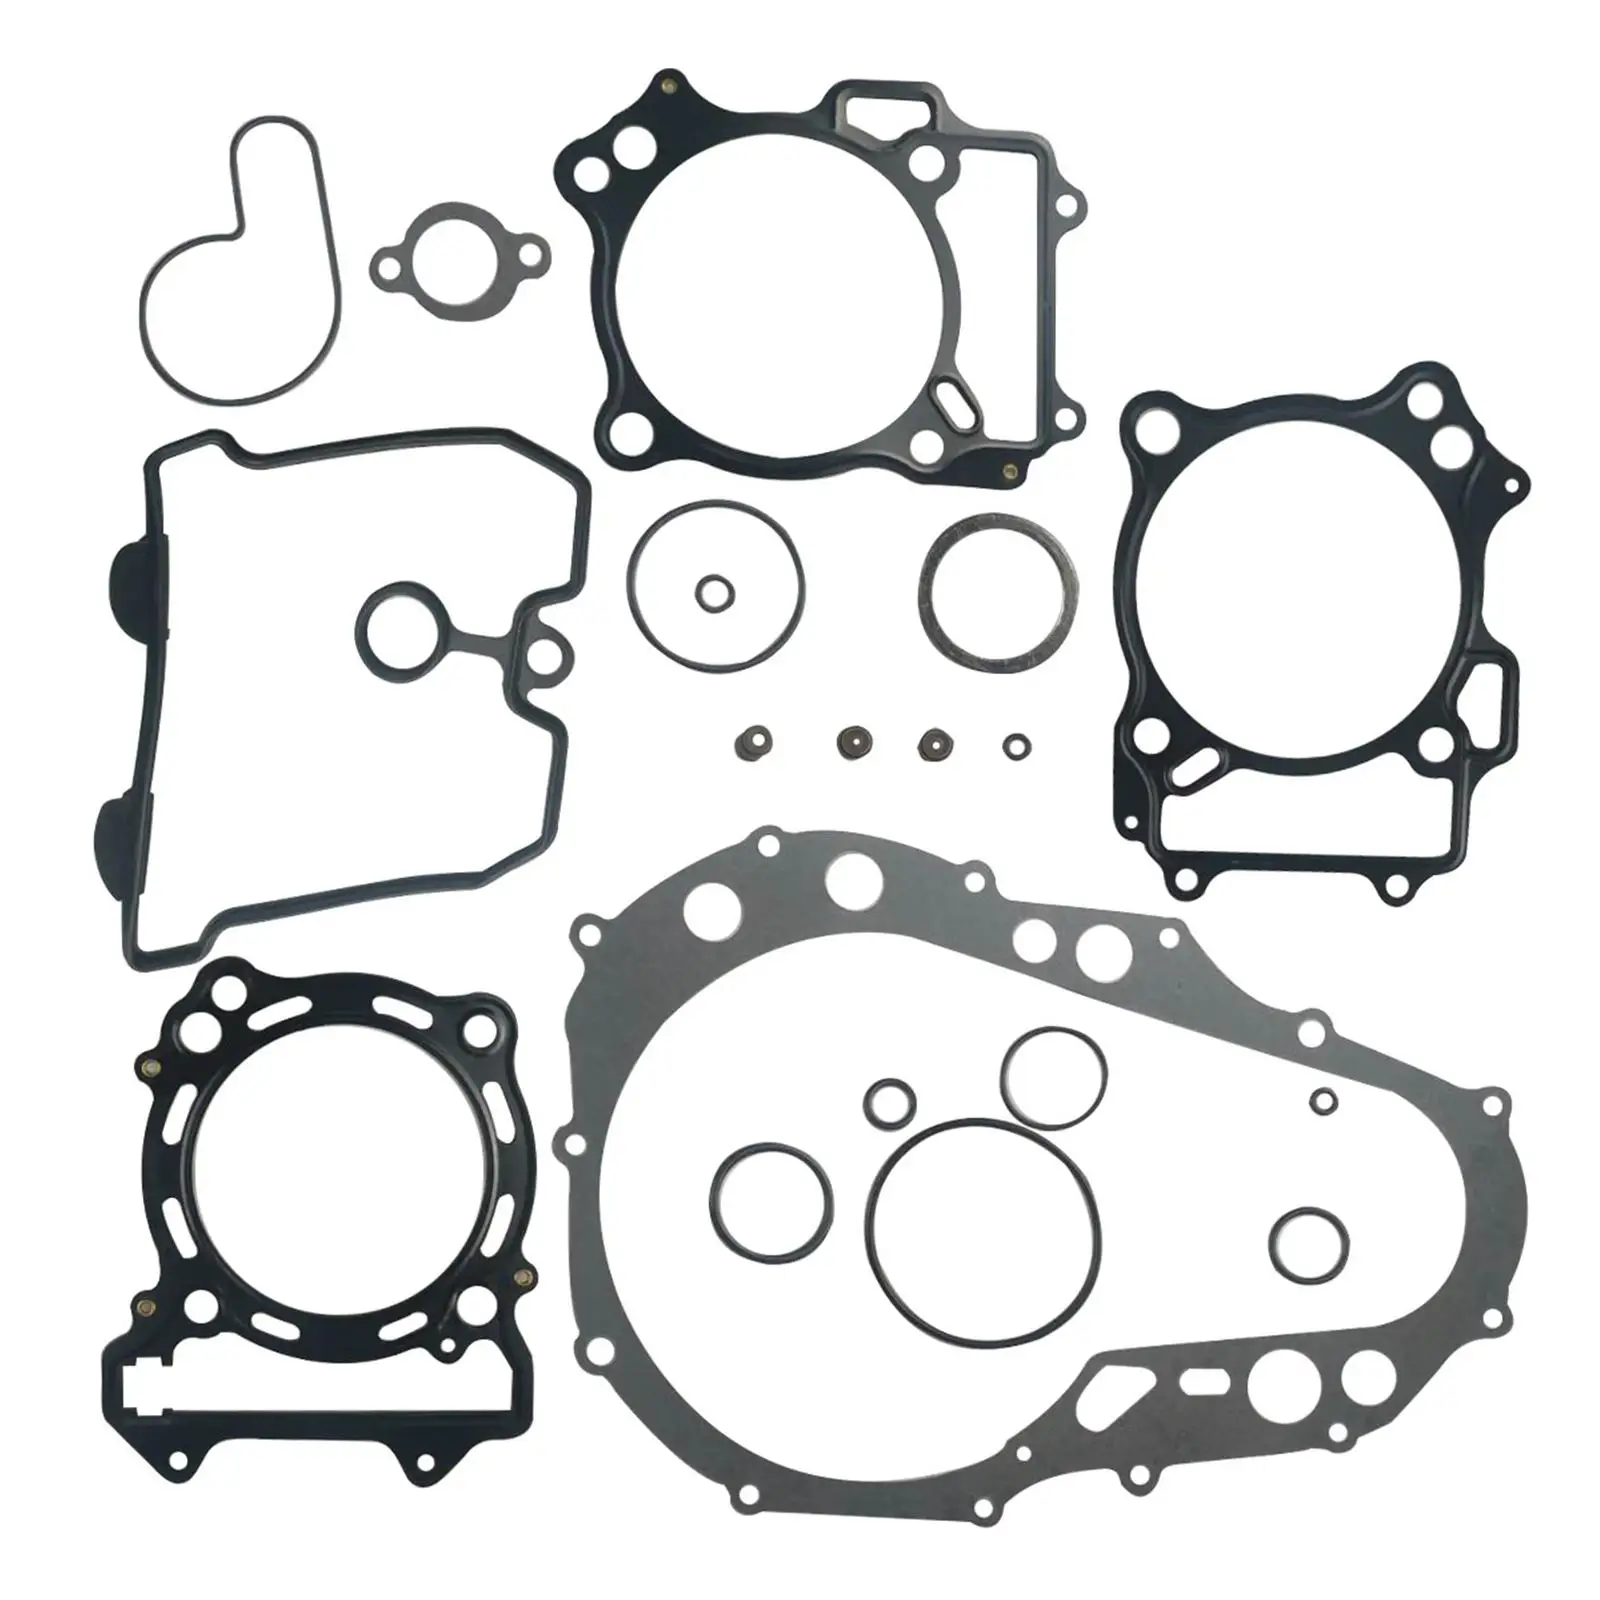 Full Set Gaskets 0934-1676 with top Bottom for  Kfx400 Replace Rebuild Easy to Install Accessories